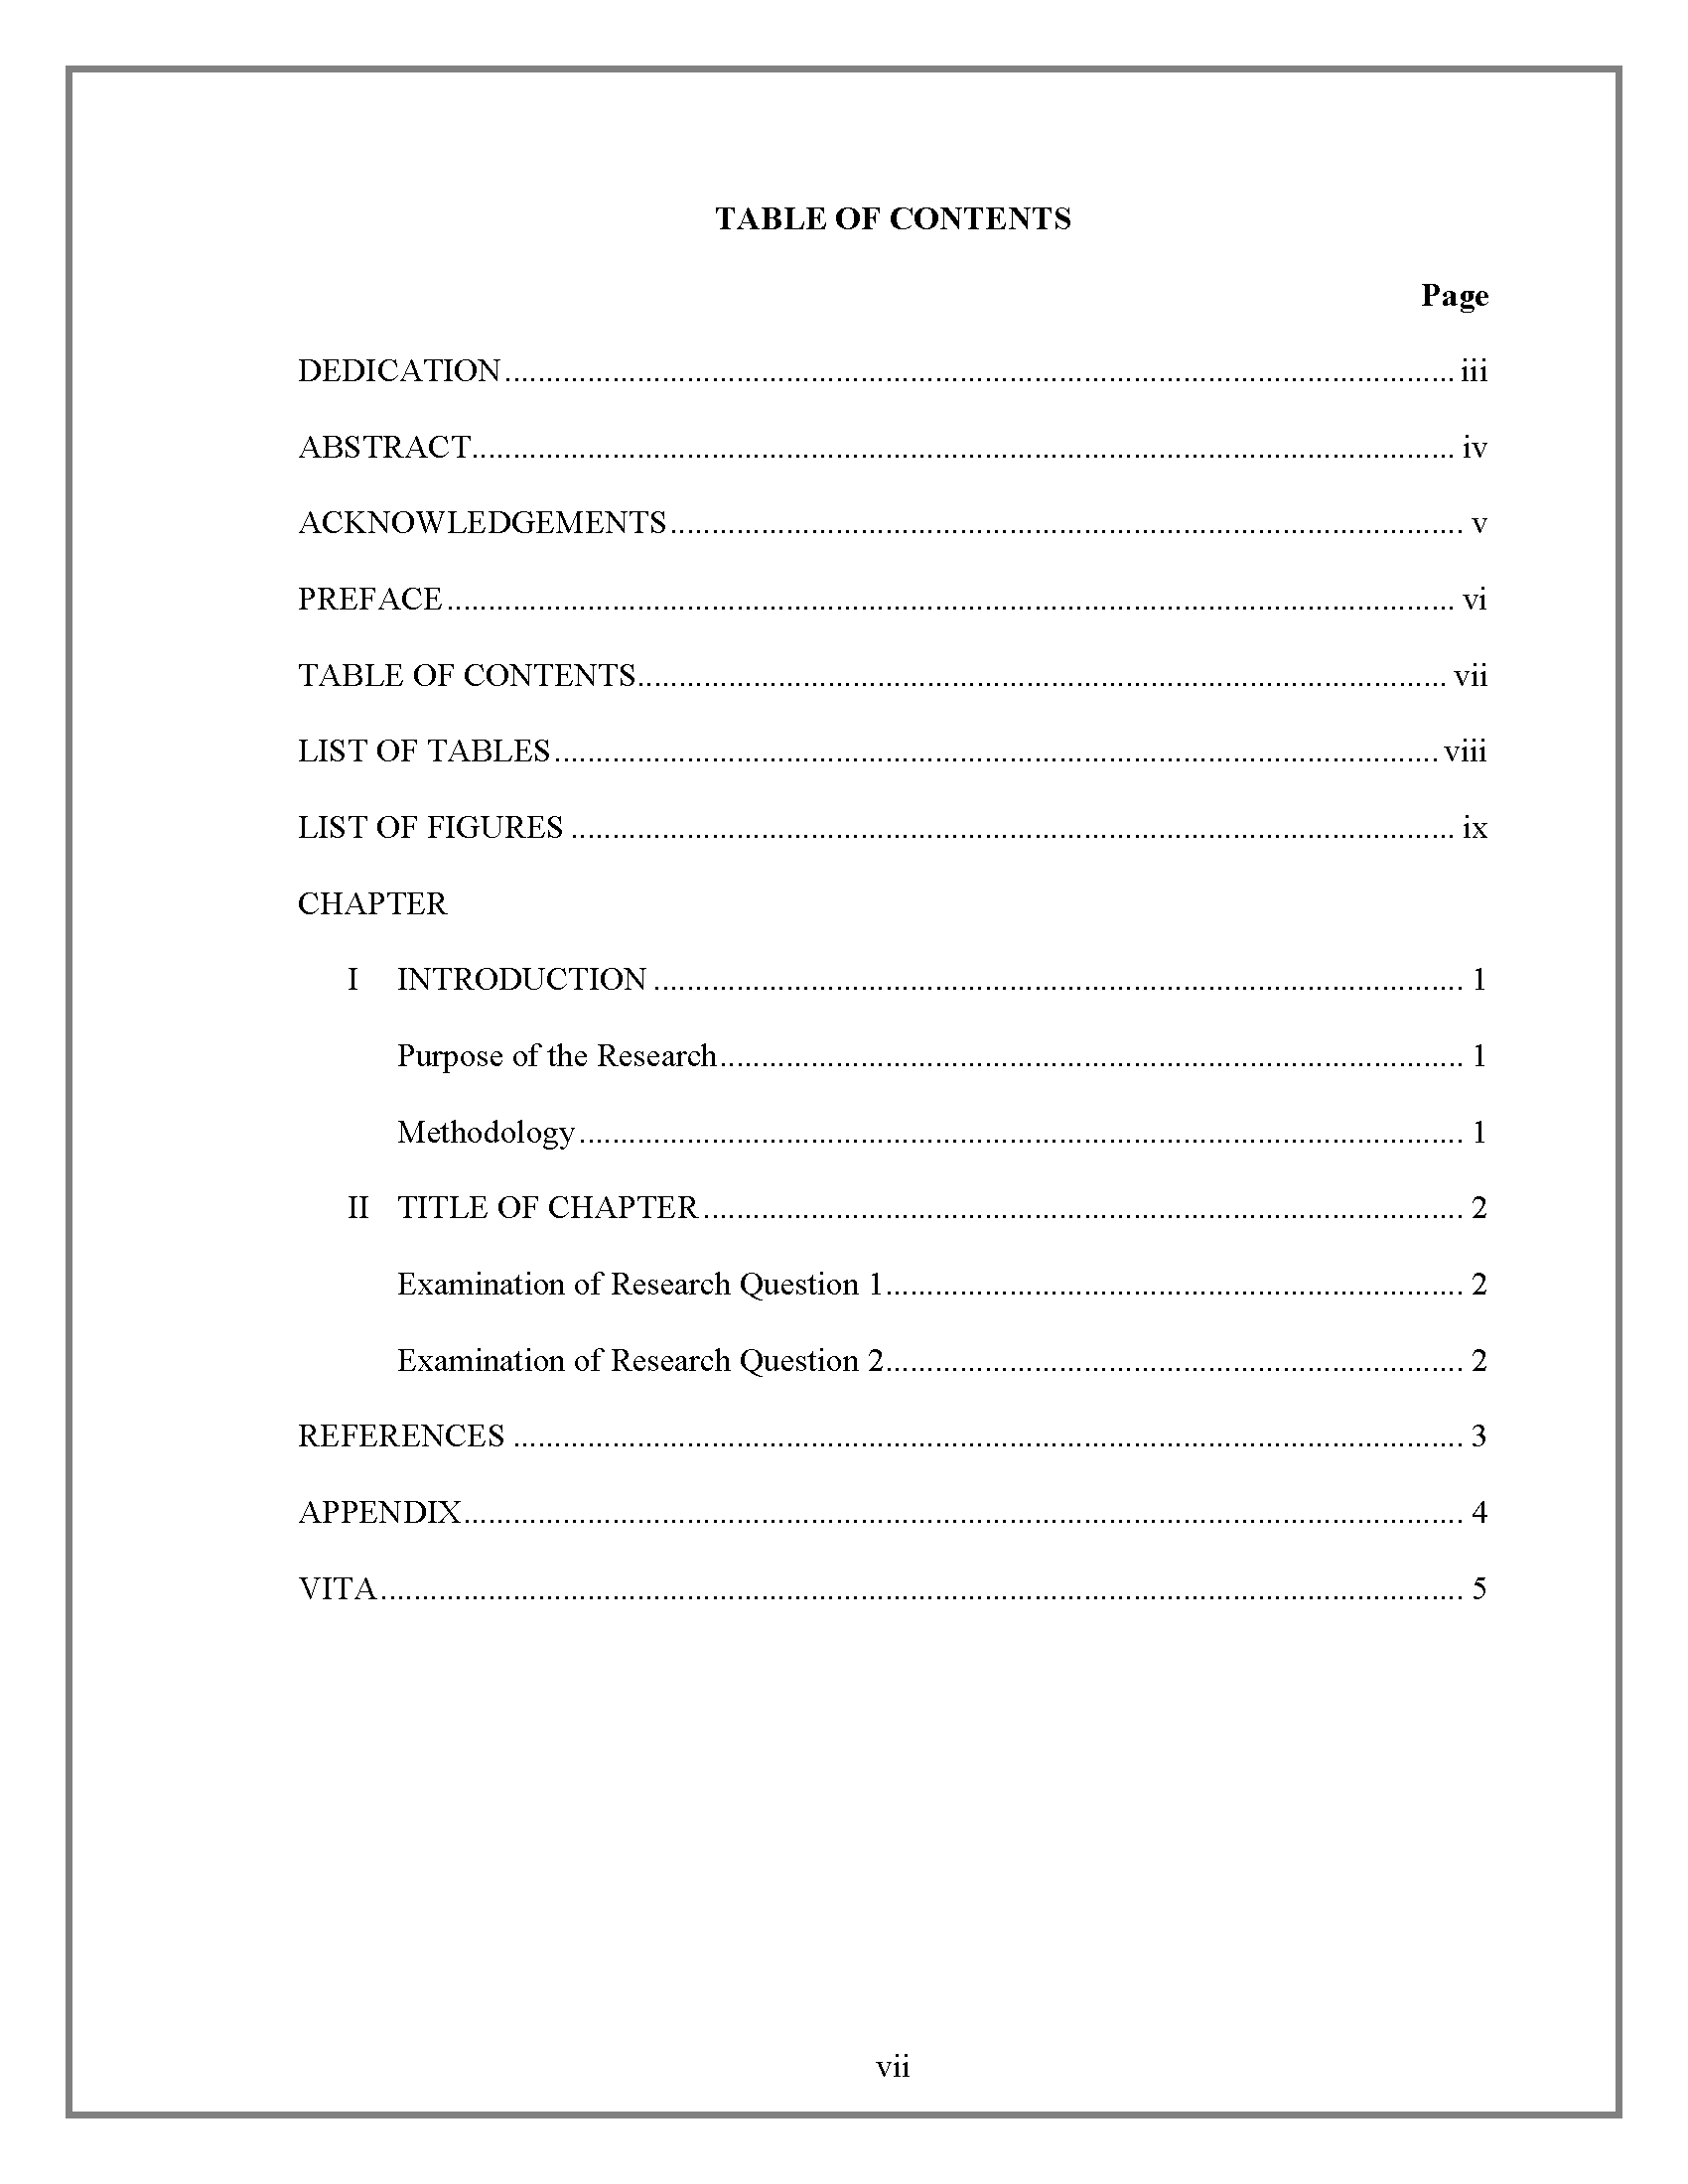 Table Of Contents - Thesis And Dissertation - Research Within Microsoft Word Table Of Contents Template